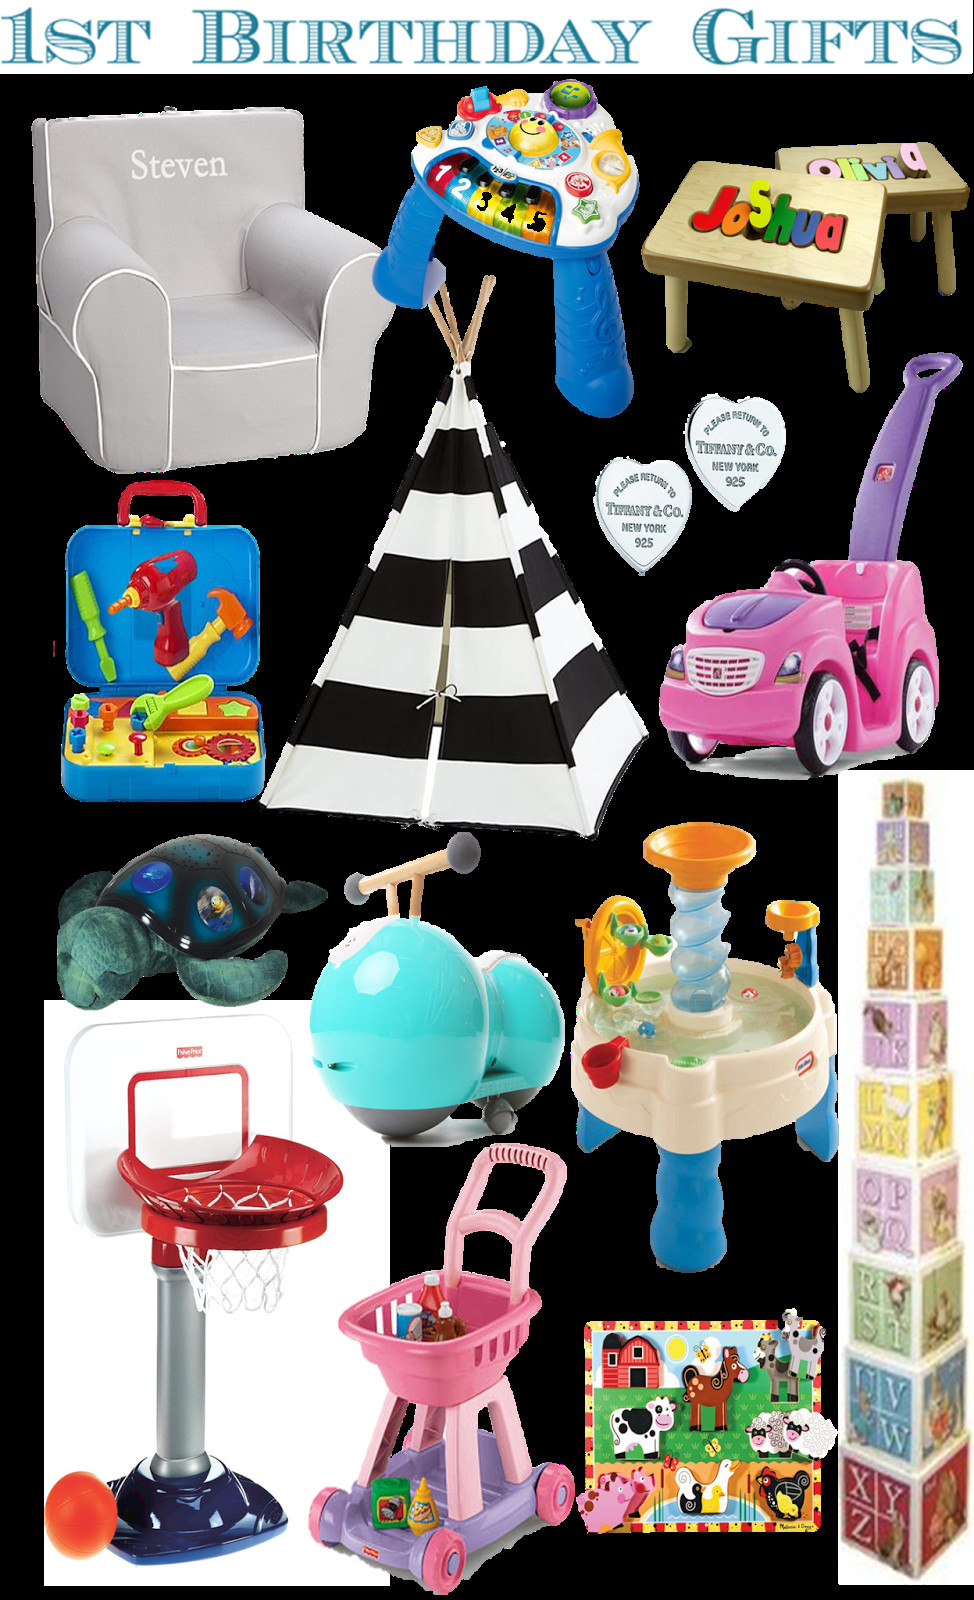 First Birthday Gifts For Boy
 rnlMusings Gift Guide 1st Birthday Gifts